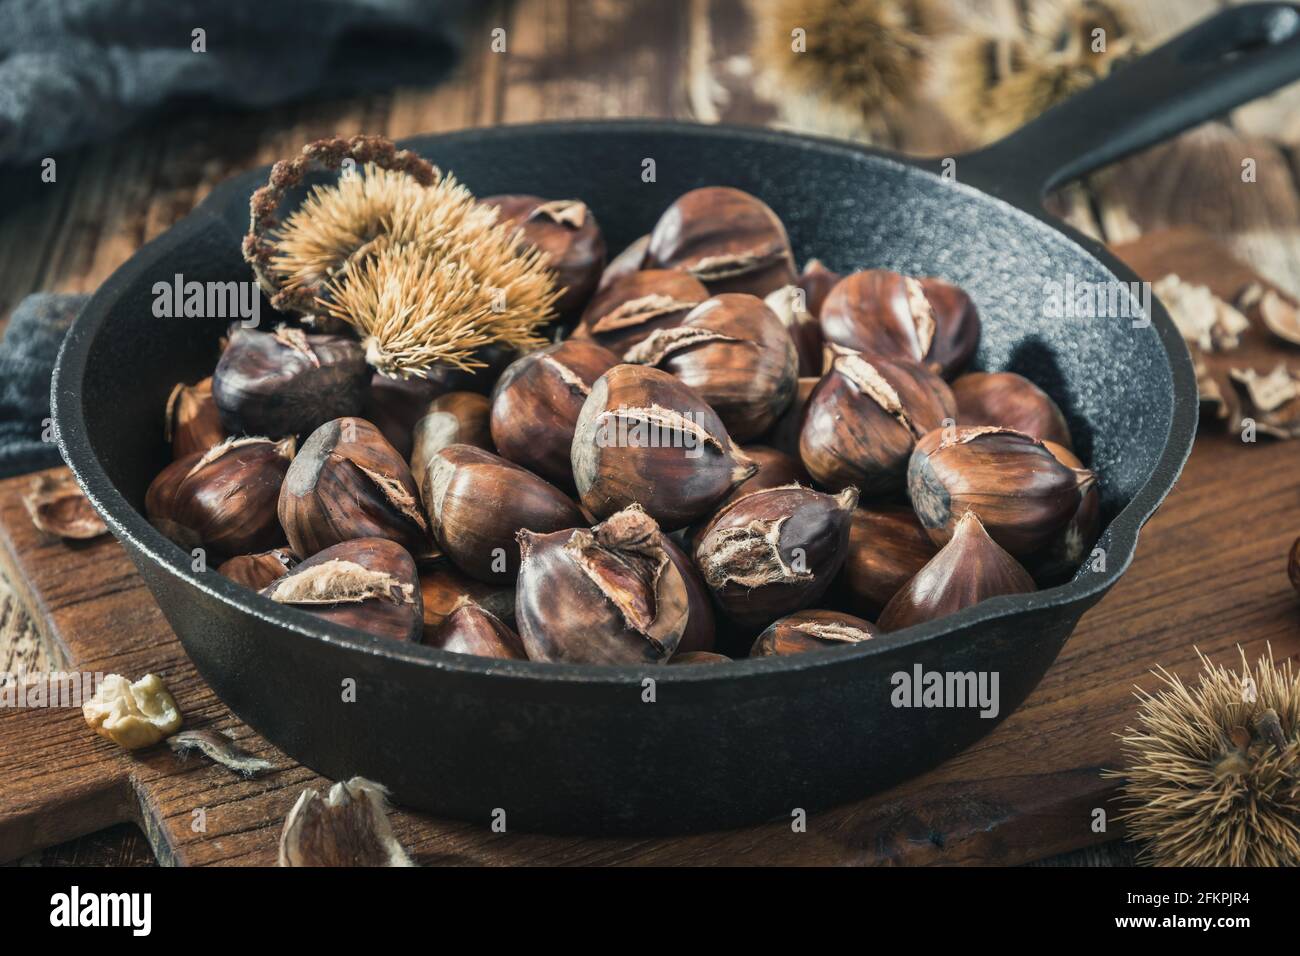 Roasted chestnuts in a cast iron pan on a wooden board Stock Photo